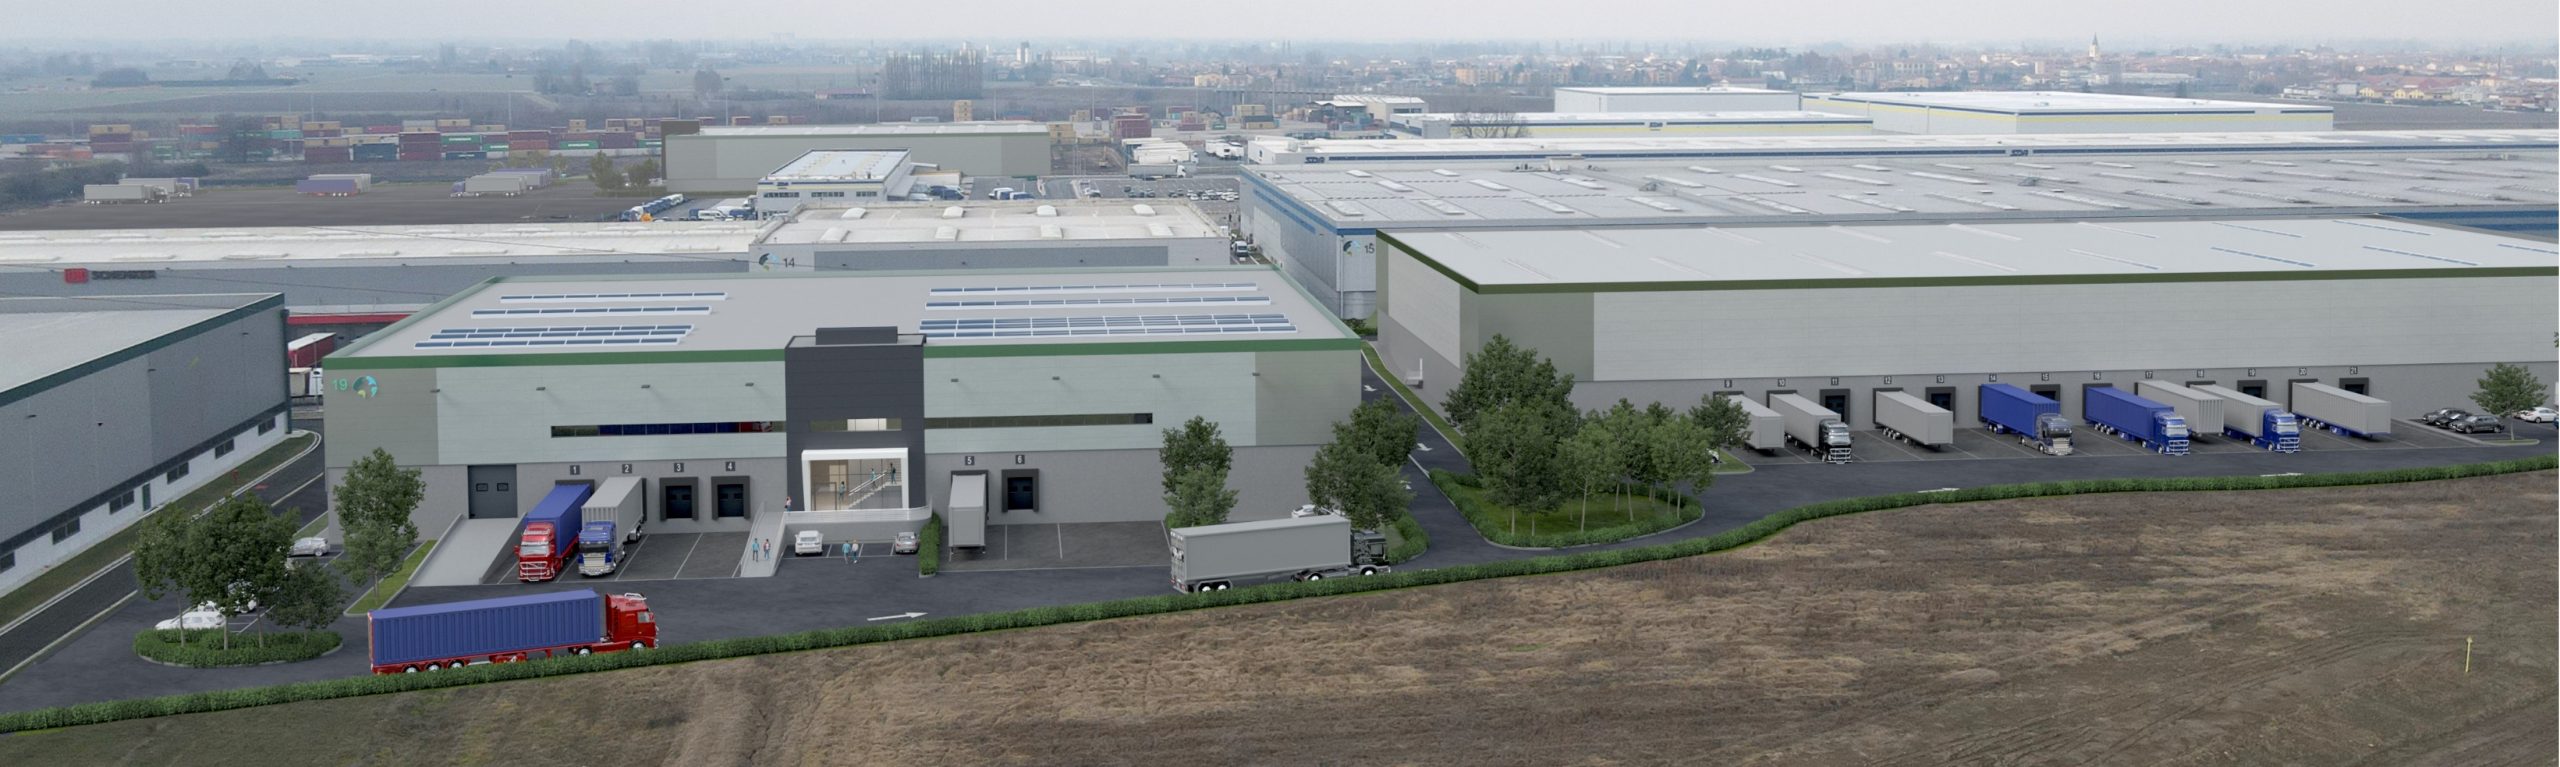 GSE ITALIA SIGNS THE THIRD PROJECT WITH PROLOGIS FOR THREE LOGISTICS WAREHOUSES AT BOLOGNA INTERPORTO